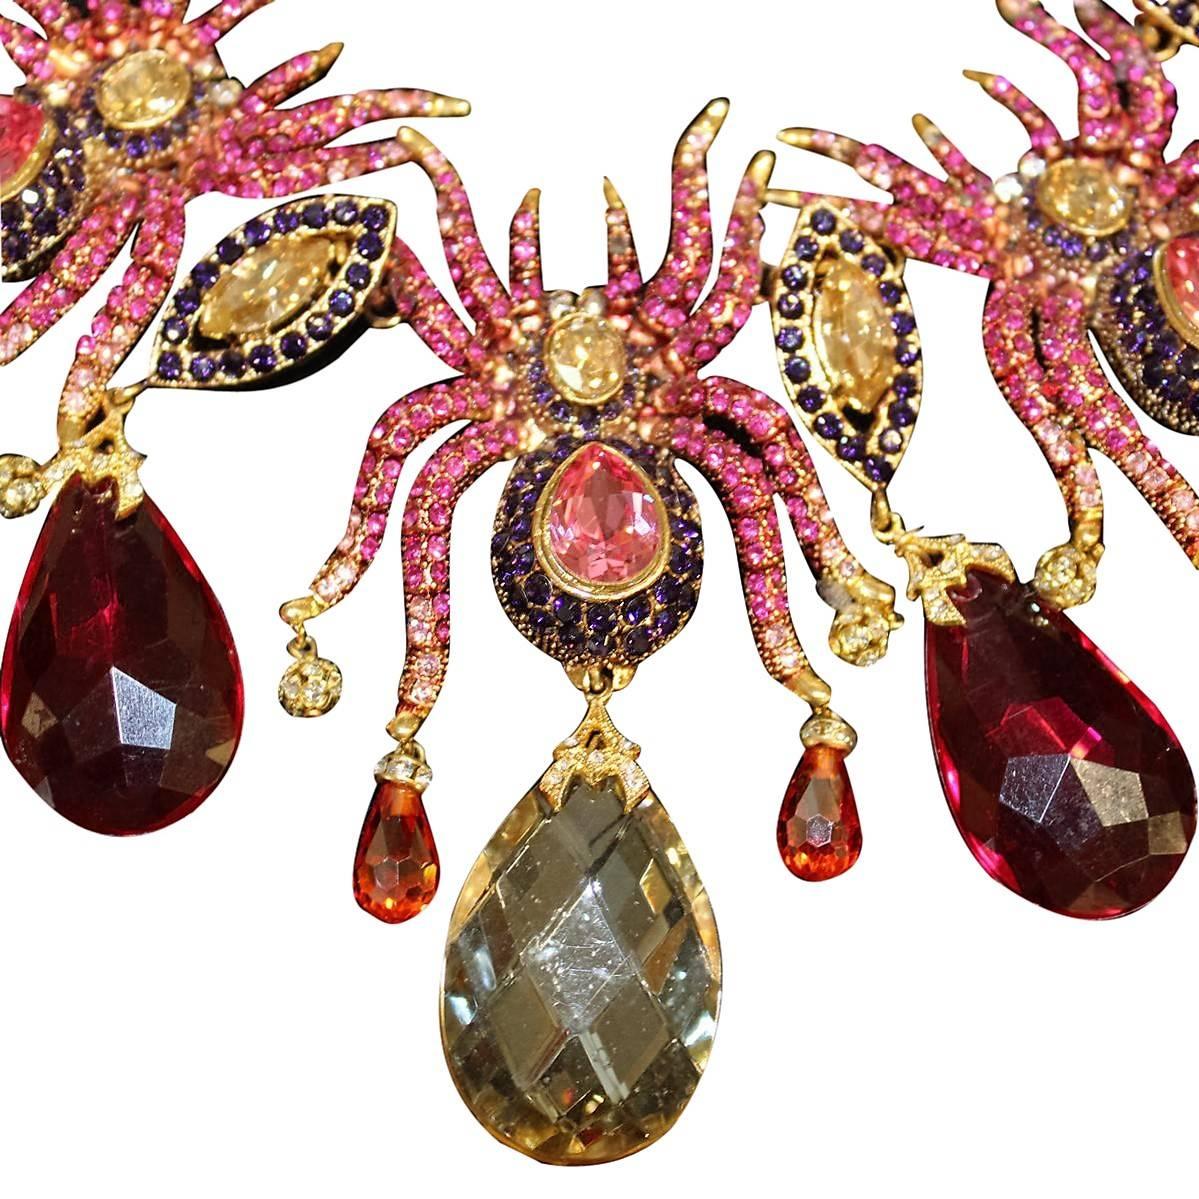 Masterpiece by Carlo Zini bijoux Milano
One of the world greatest costume jewellers
Non allergenic rhodium
Multicolored spiders theme
Amazing hand creation of crystals and colored resins
Unique piece !
Made in Italy, artisanal way
Worldwide